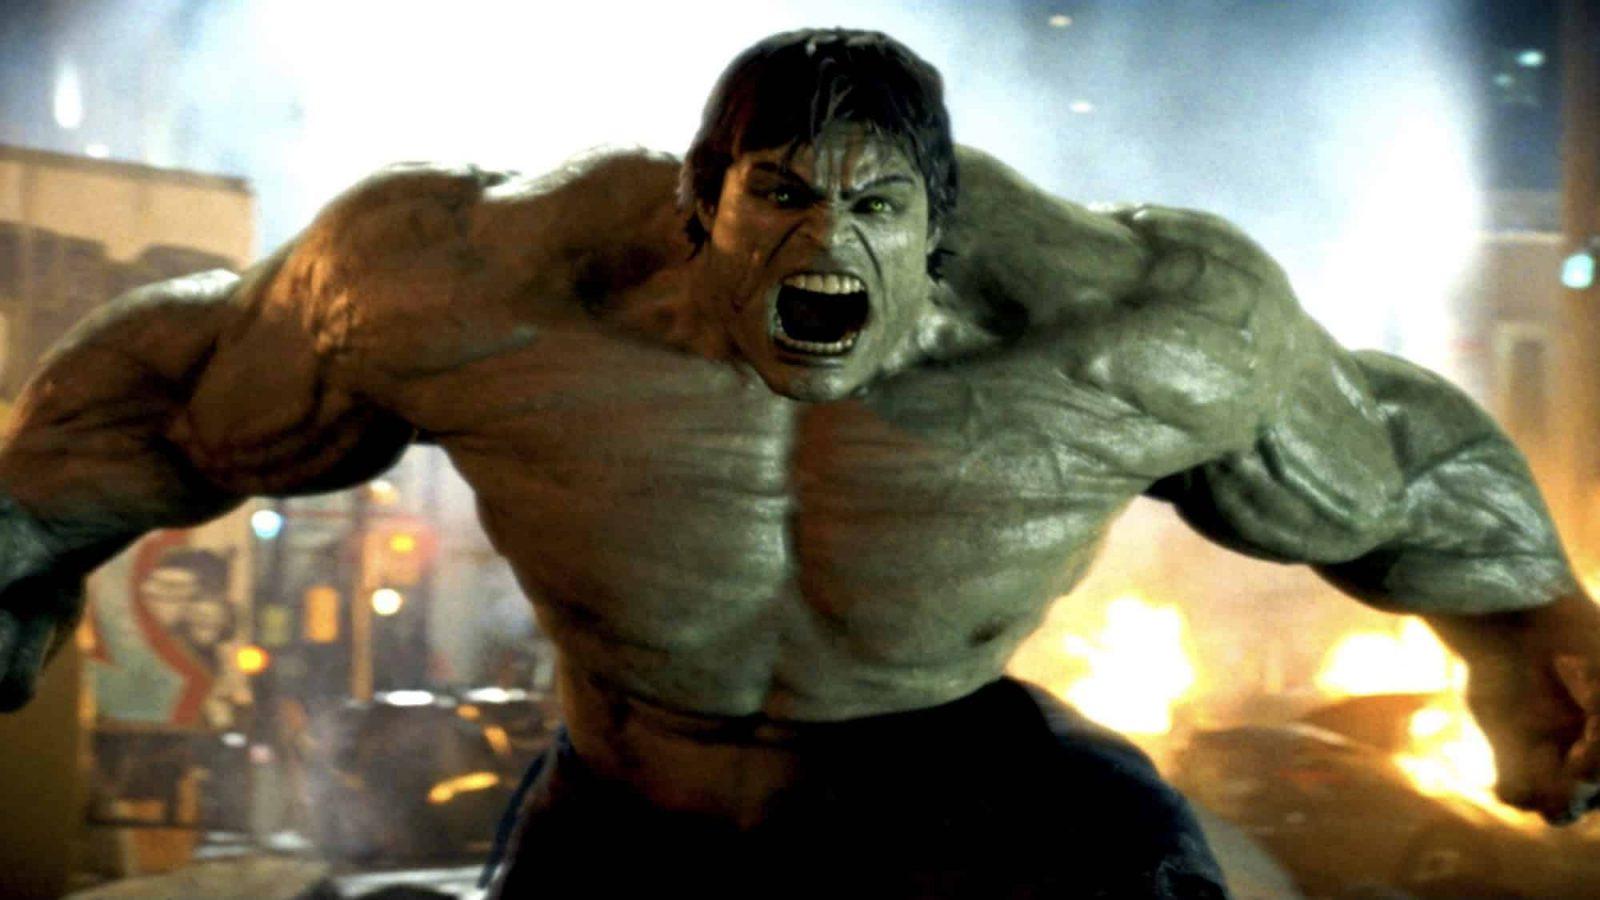 the-incredible-hulk-gets-angry-in-phase-1-of-the-marvel-cinematic-universe